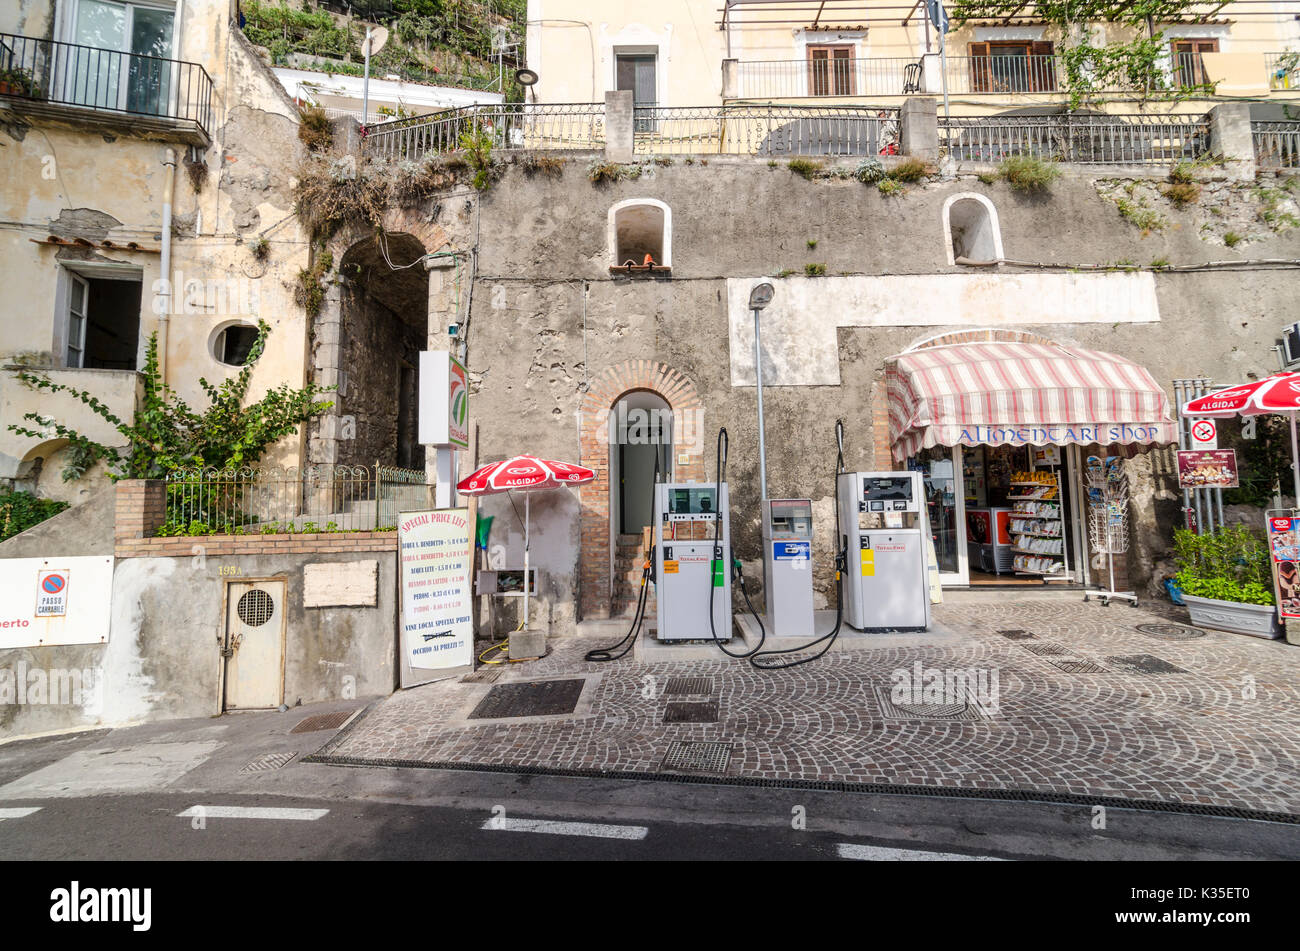 Small local shop in Positano, Italy selling petrol fuel. Stock Photo